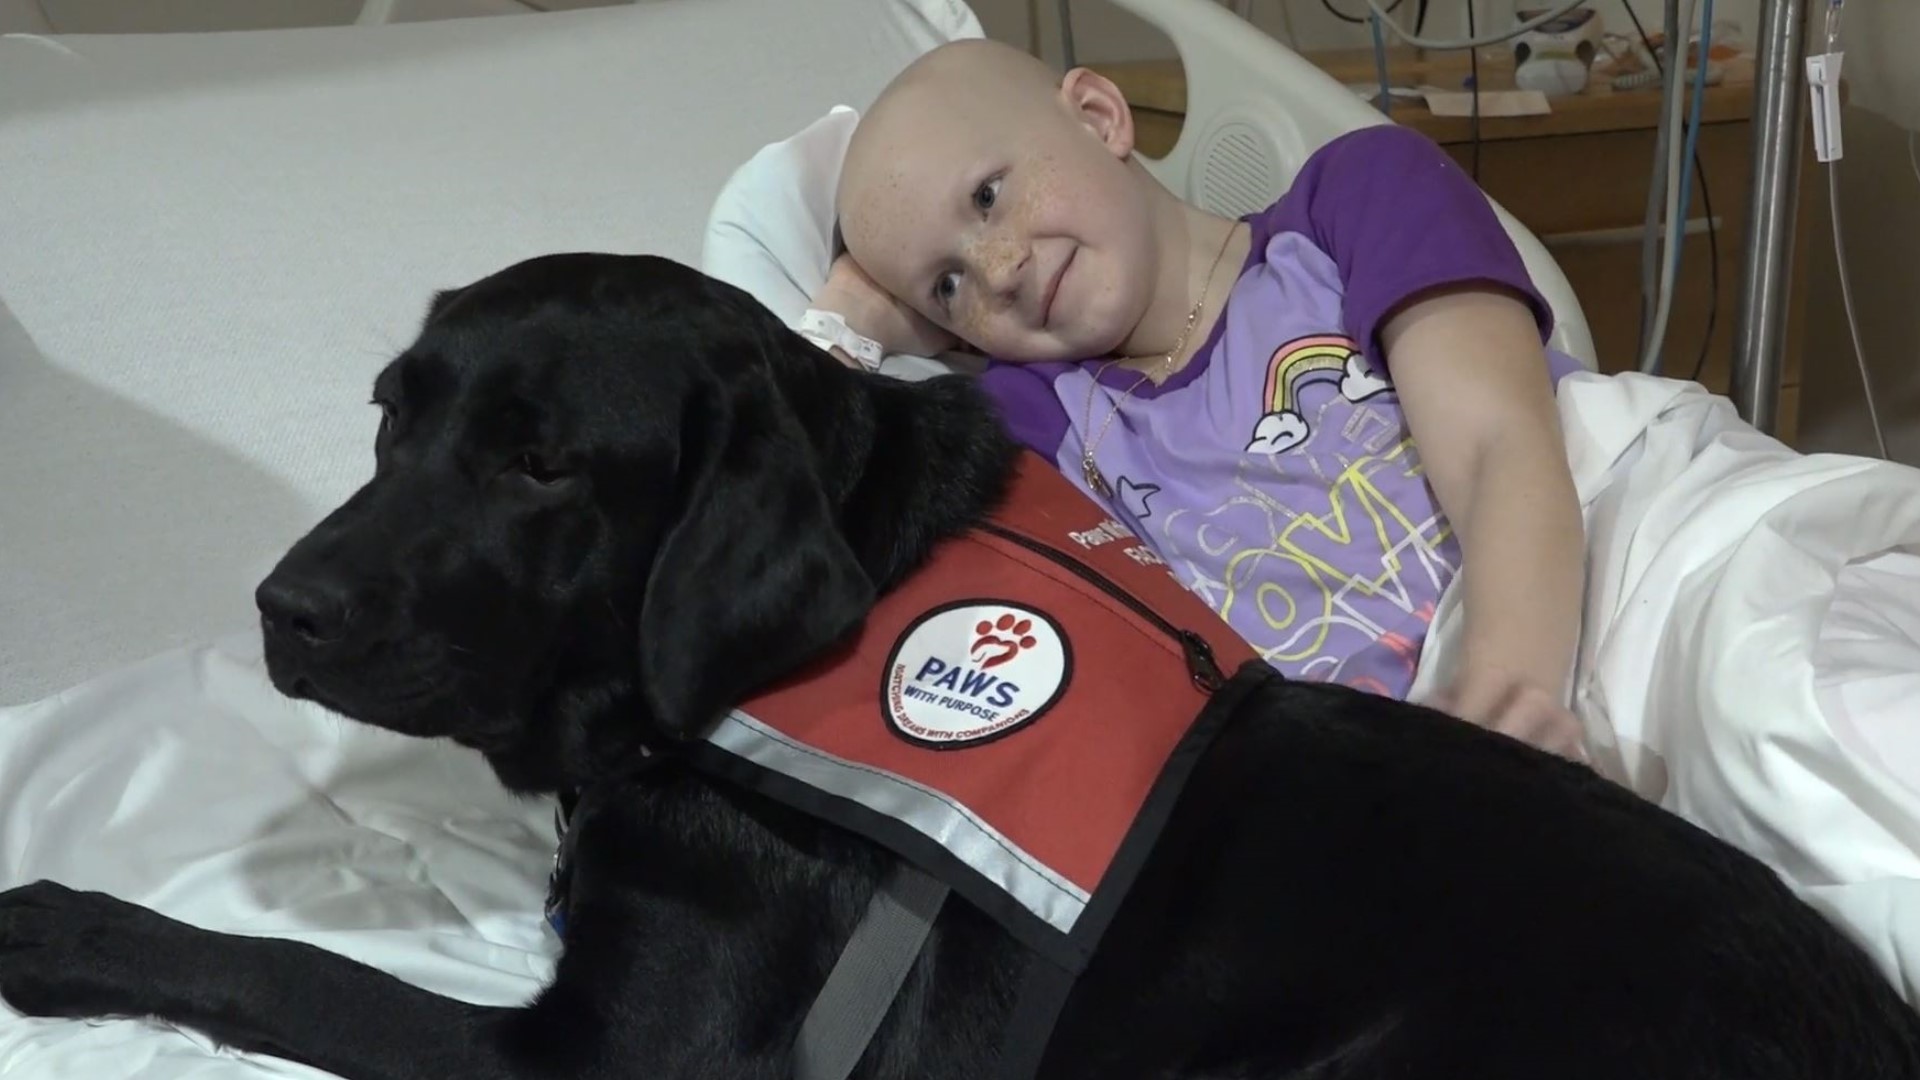 Cancer patients at Norton Children's Hospital now have a furry friend to lift their spirits.